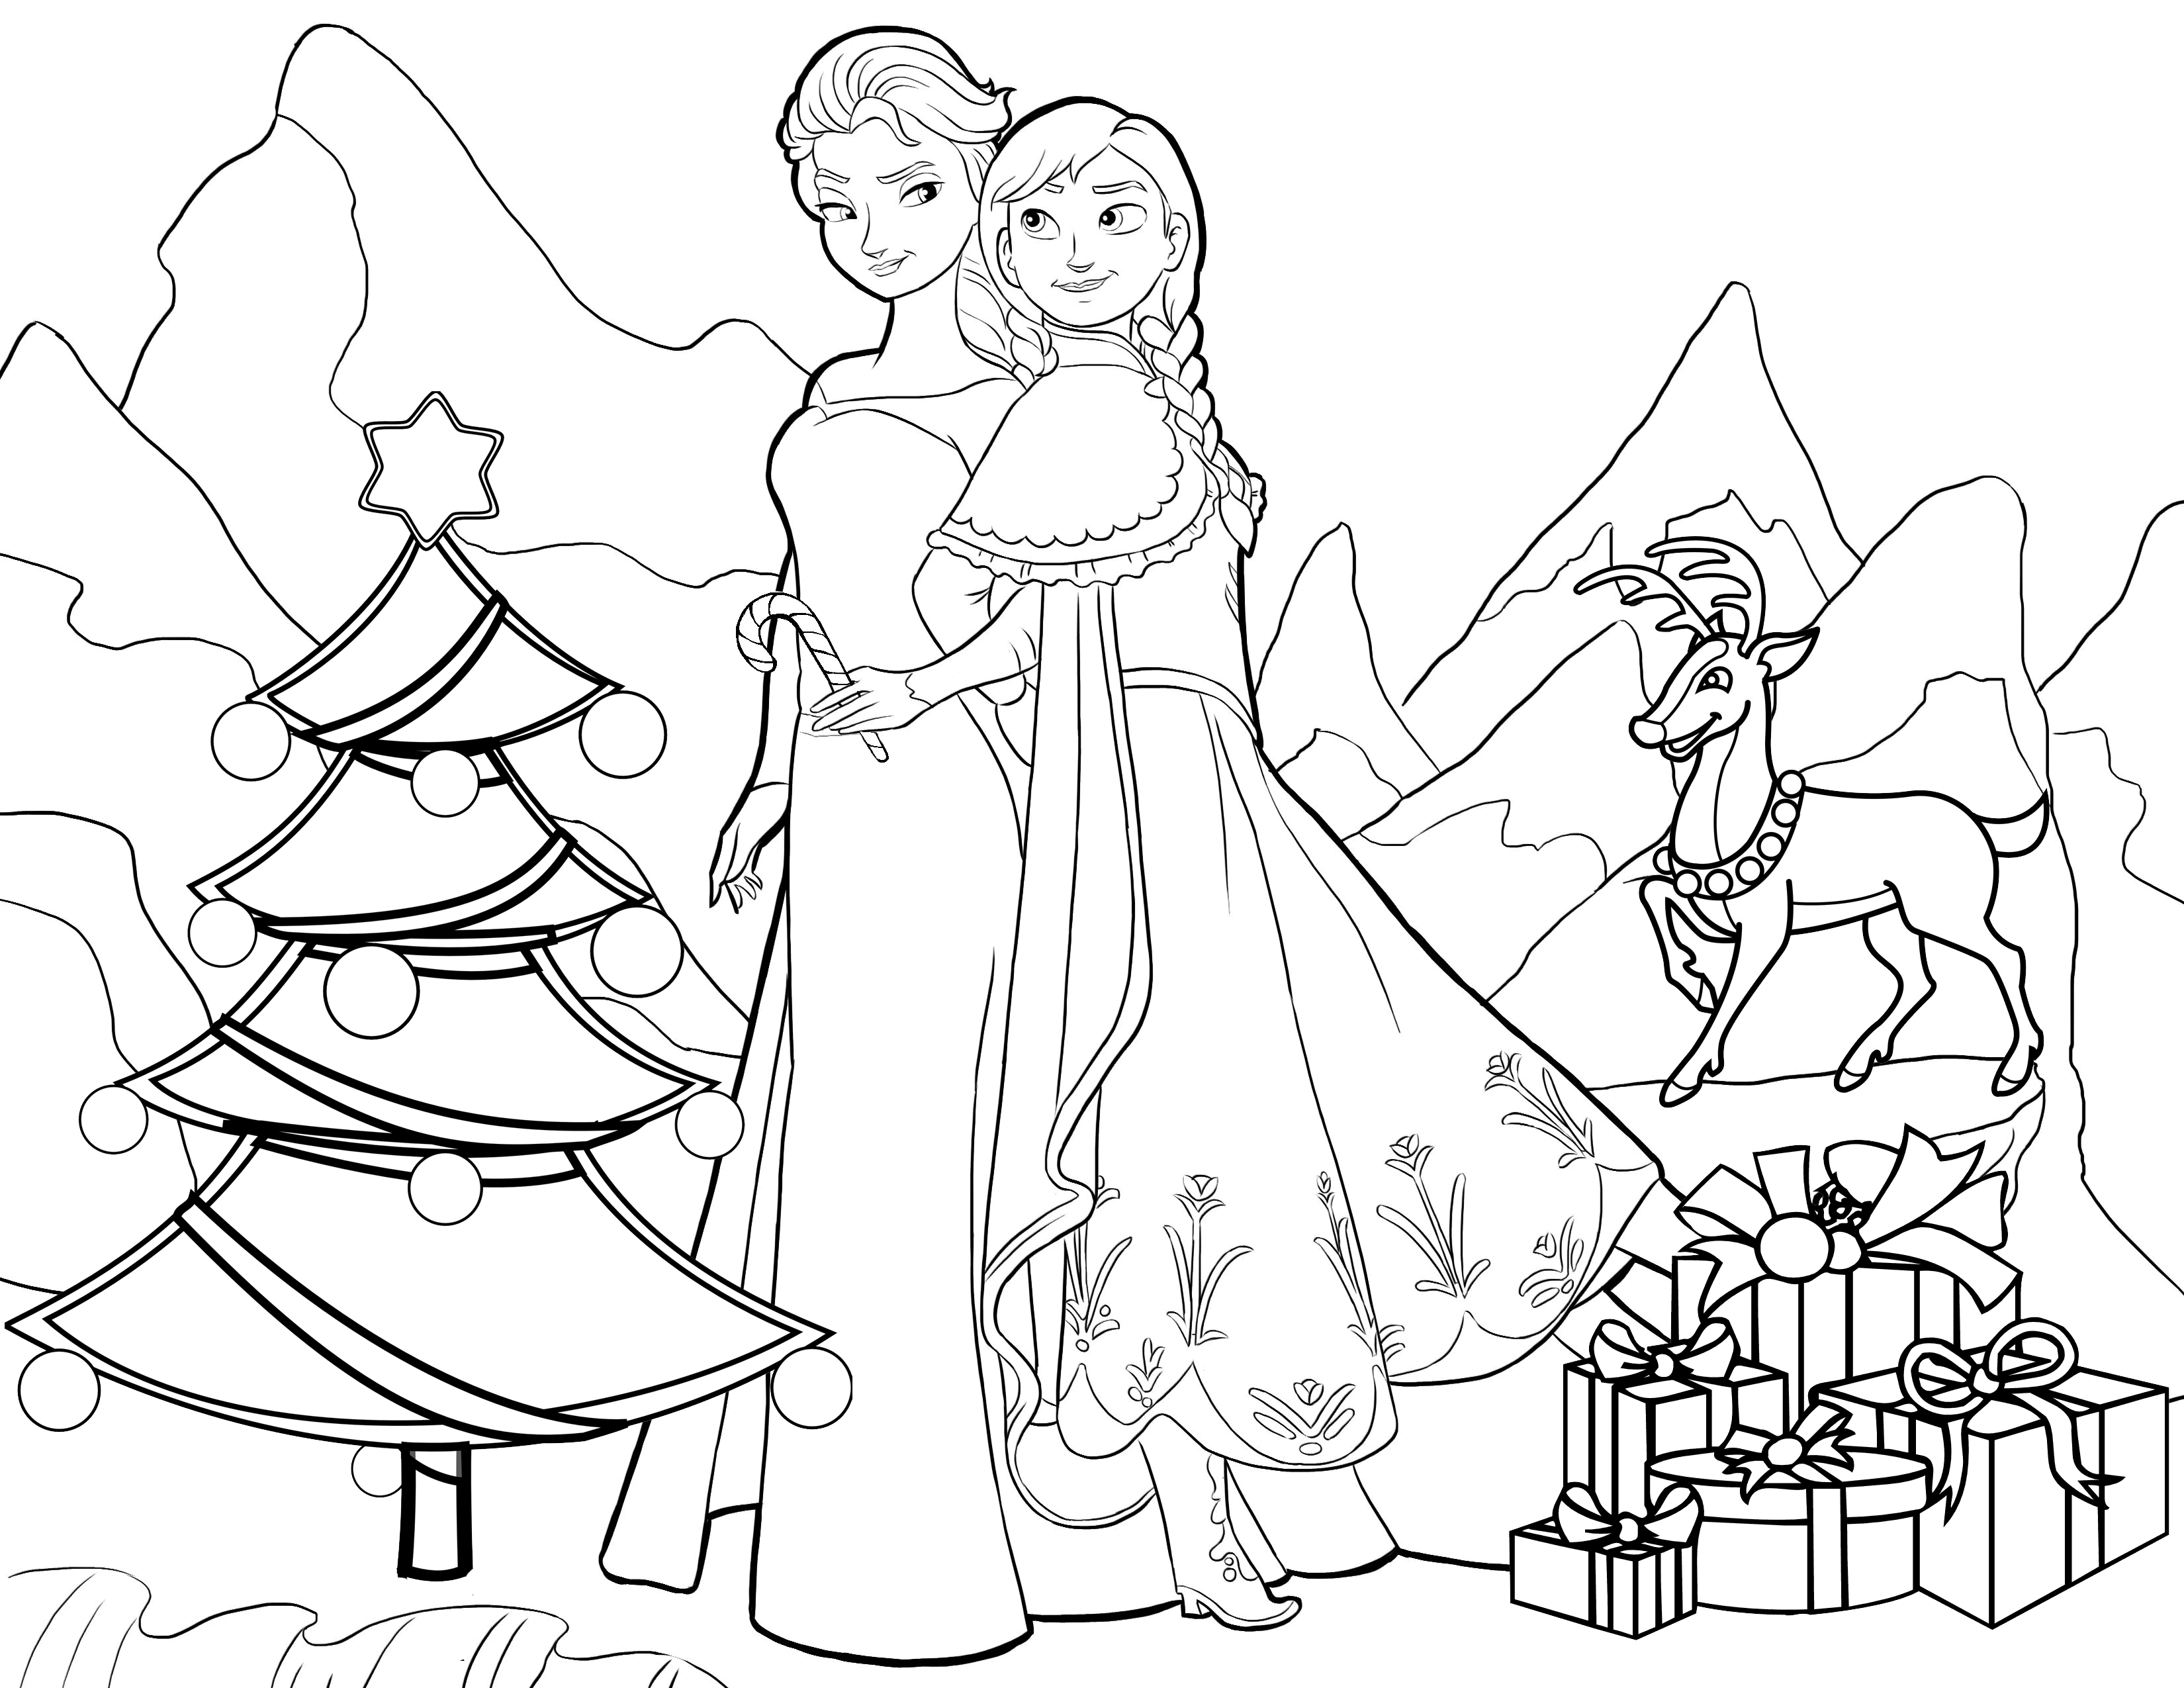 disney-frozen-christmas-coloring-pages-thousand-of-the-best-printable